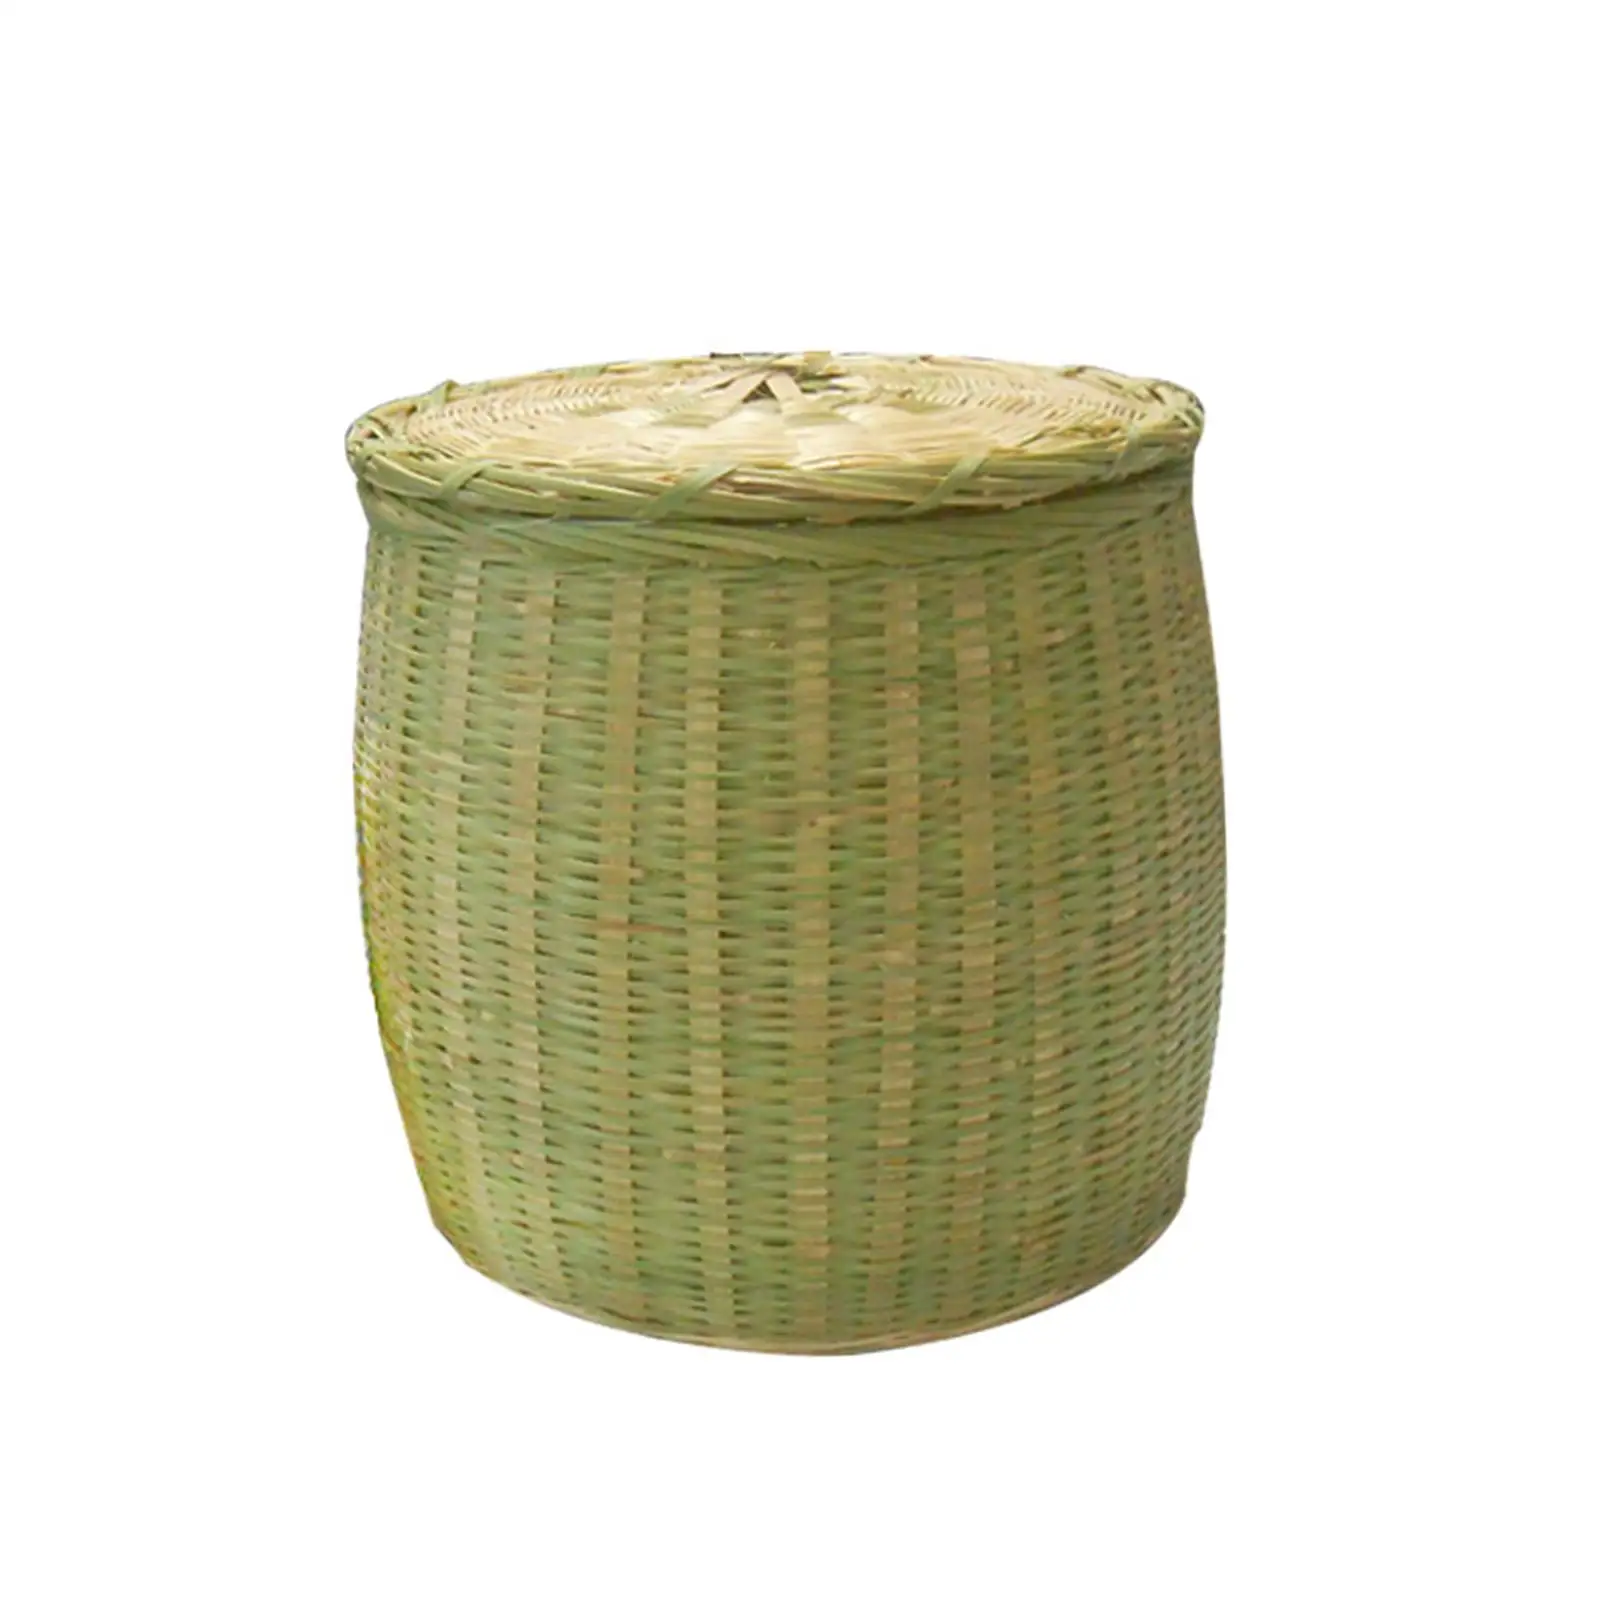 Decorative Storage Basket Rustic Countertop Portable Bamboo Woven Basket for Living Room Sundries Wedding Bedroom Cosmetic